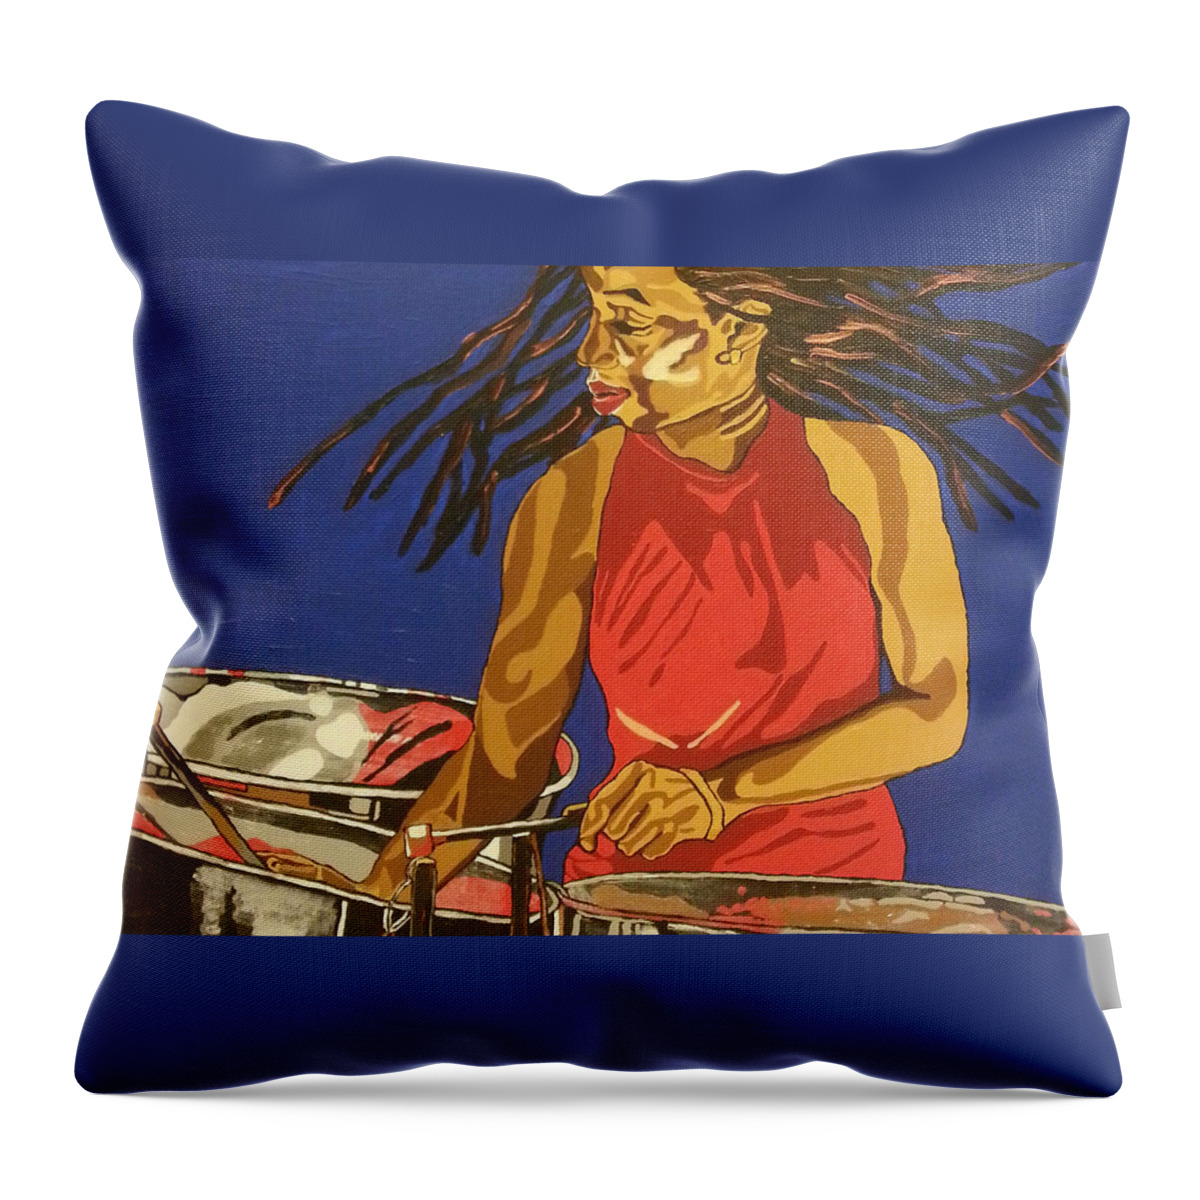 Steel Pan Throw Pillow featuring the painting Blue Steel by Rachel Natalie Rawlins